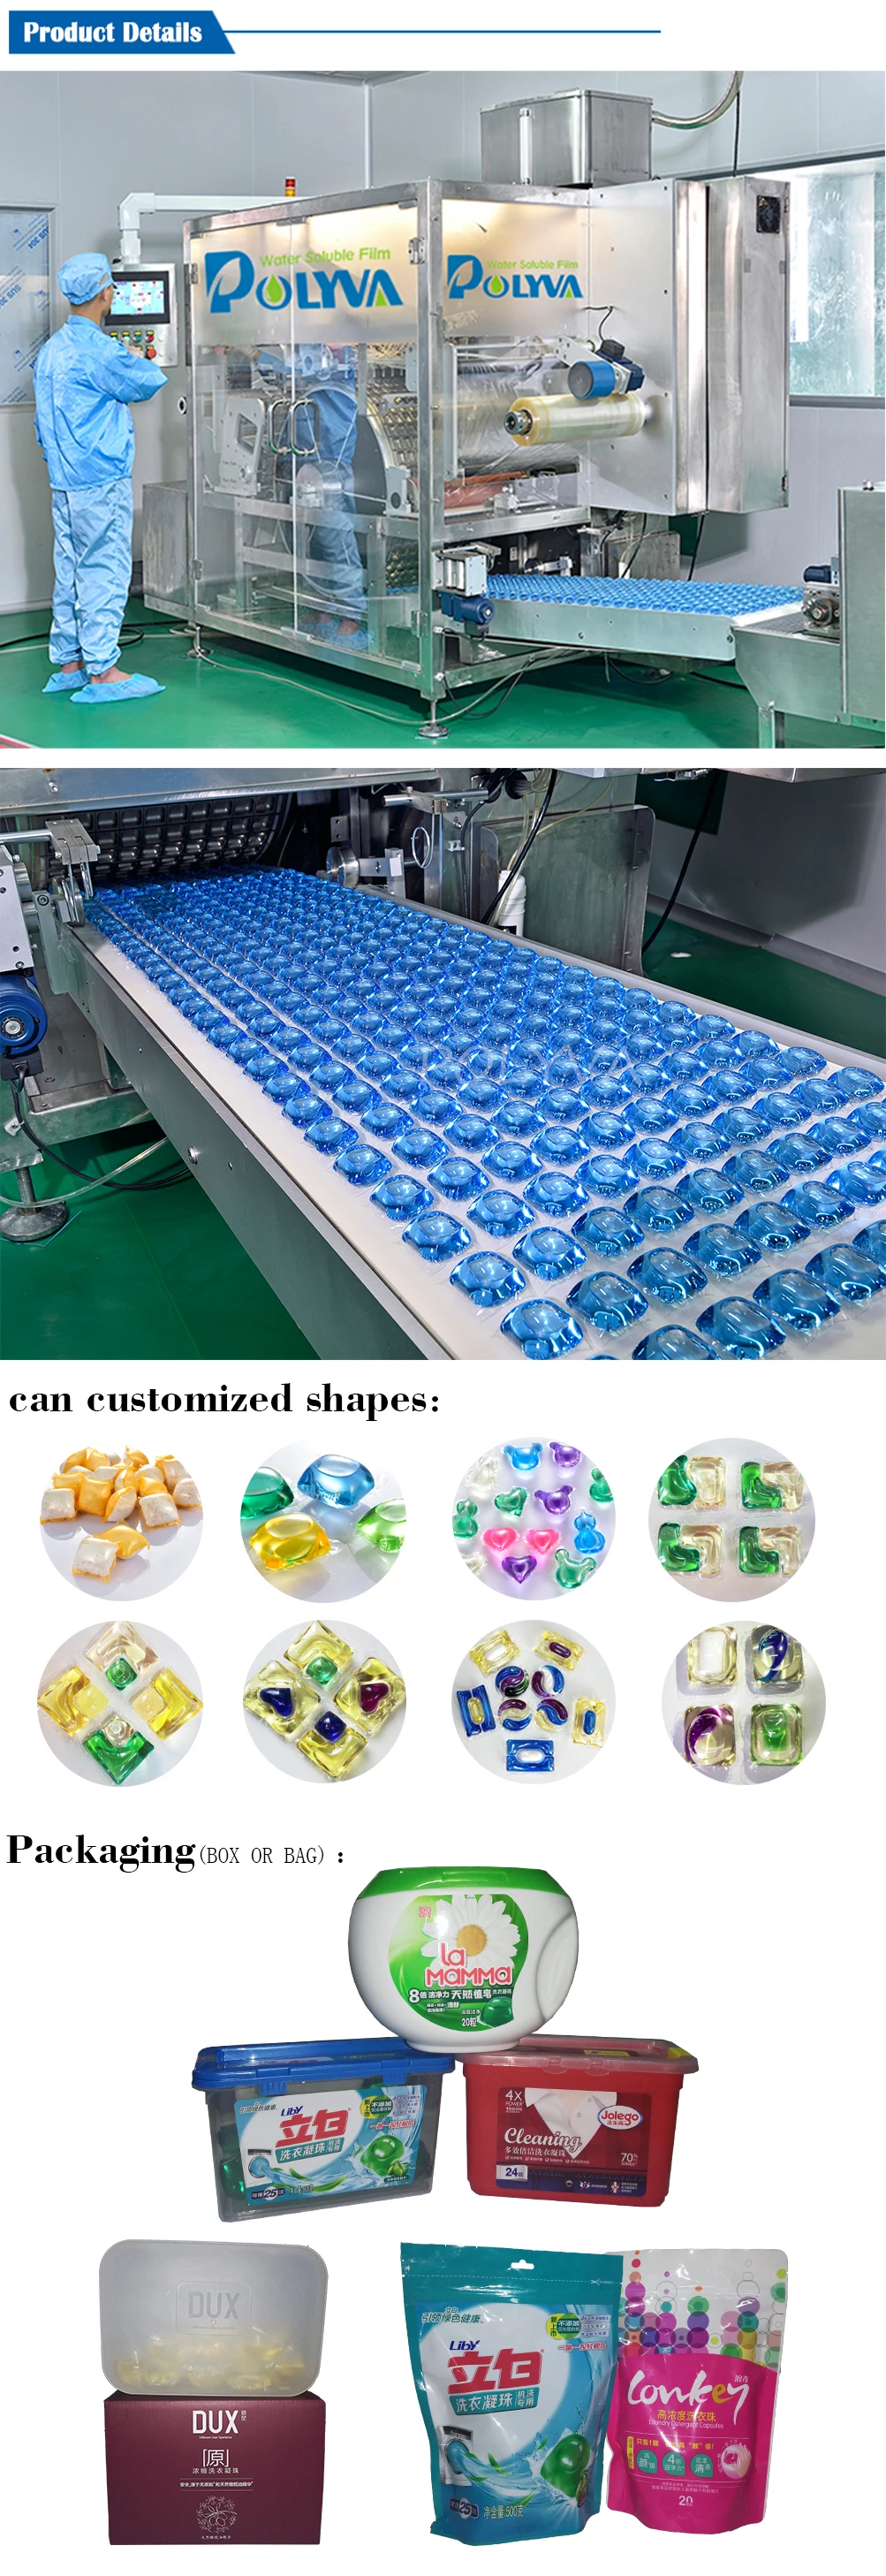 high quality wholesale liquid laundry detergent beads